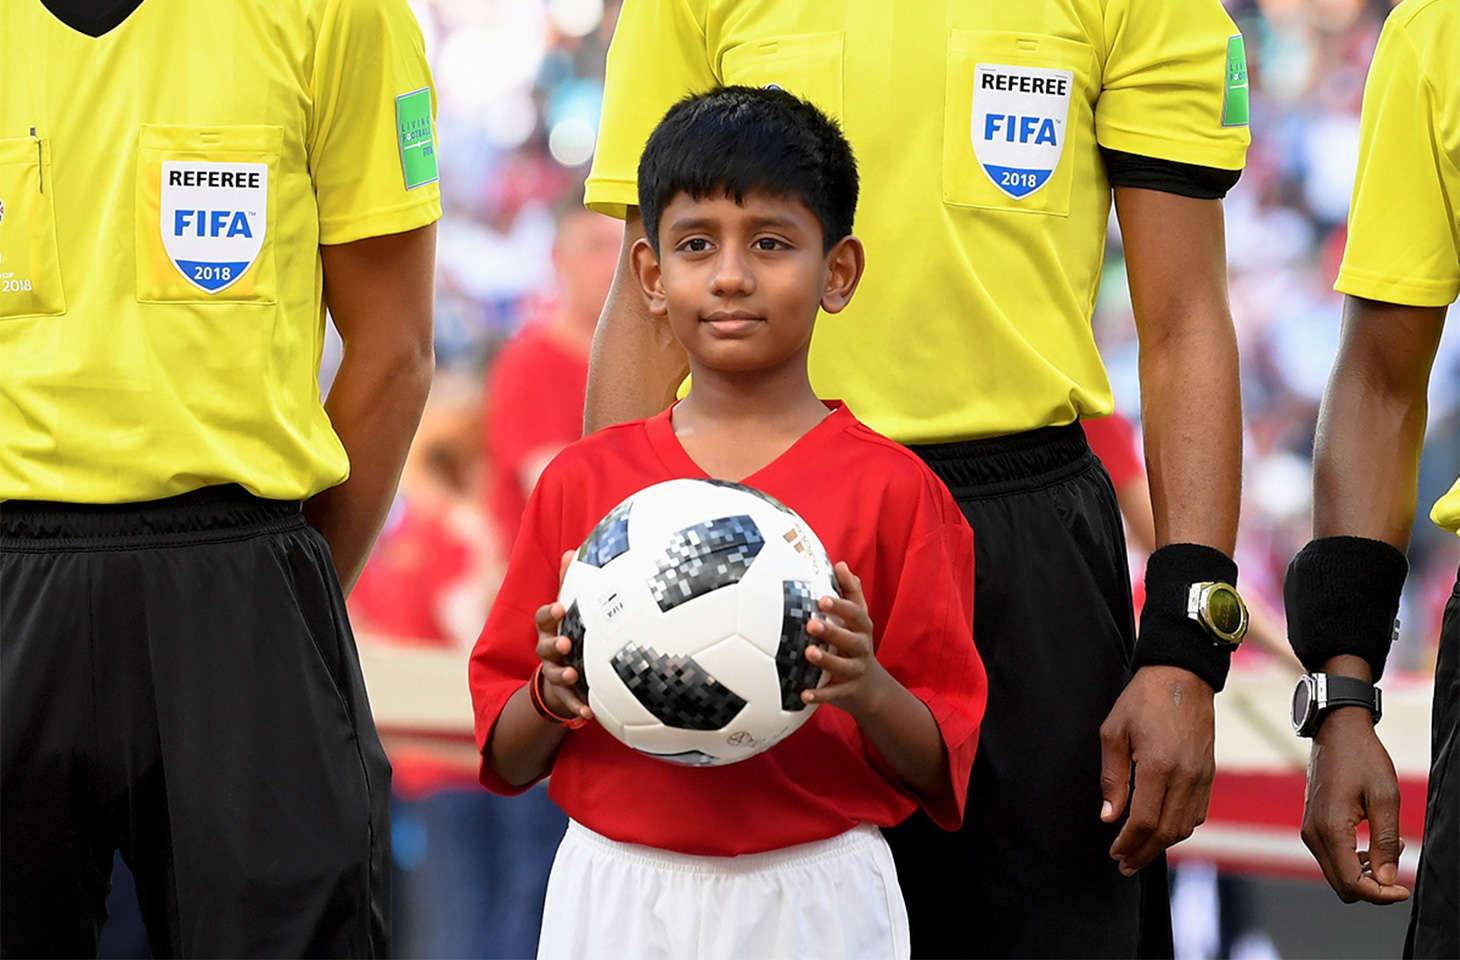 kia official match ball carriers 1 kids from india for the first time at fifa world cup